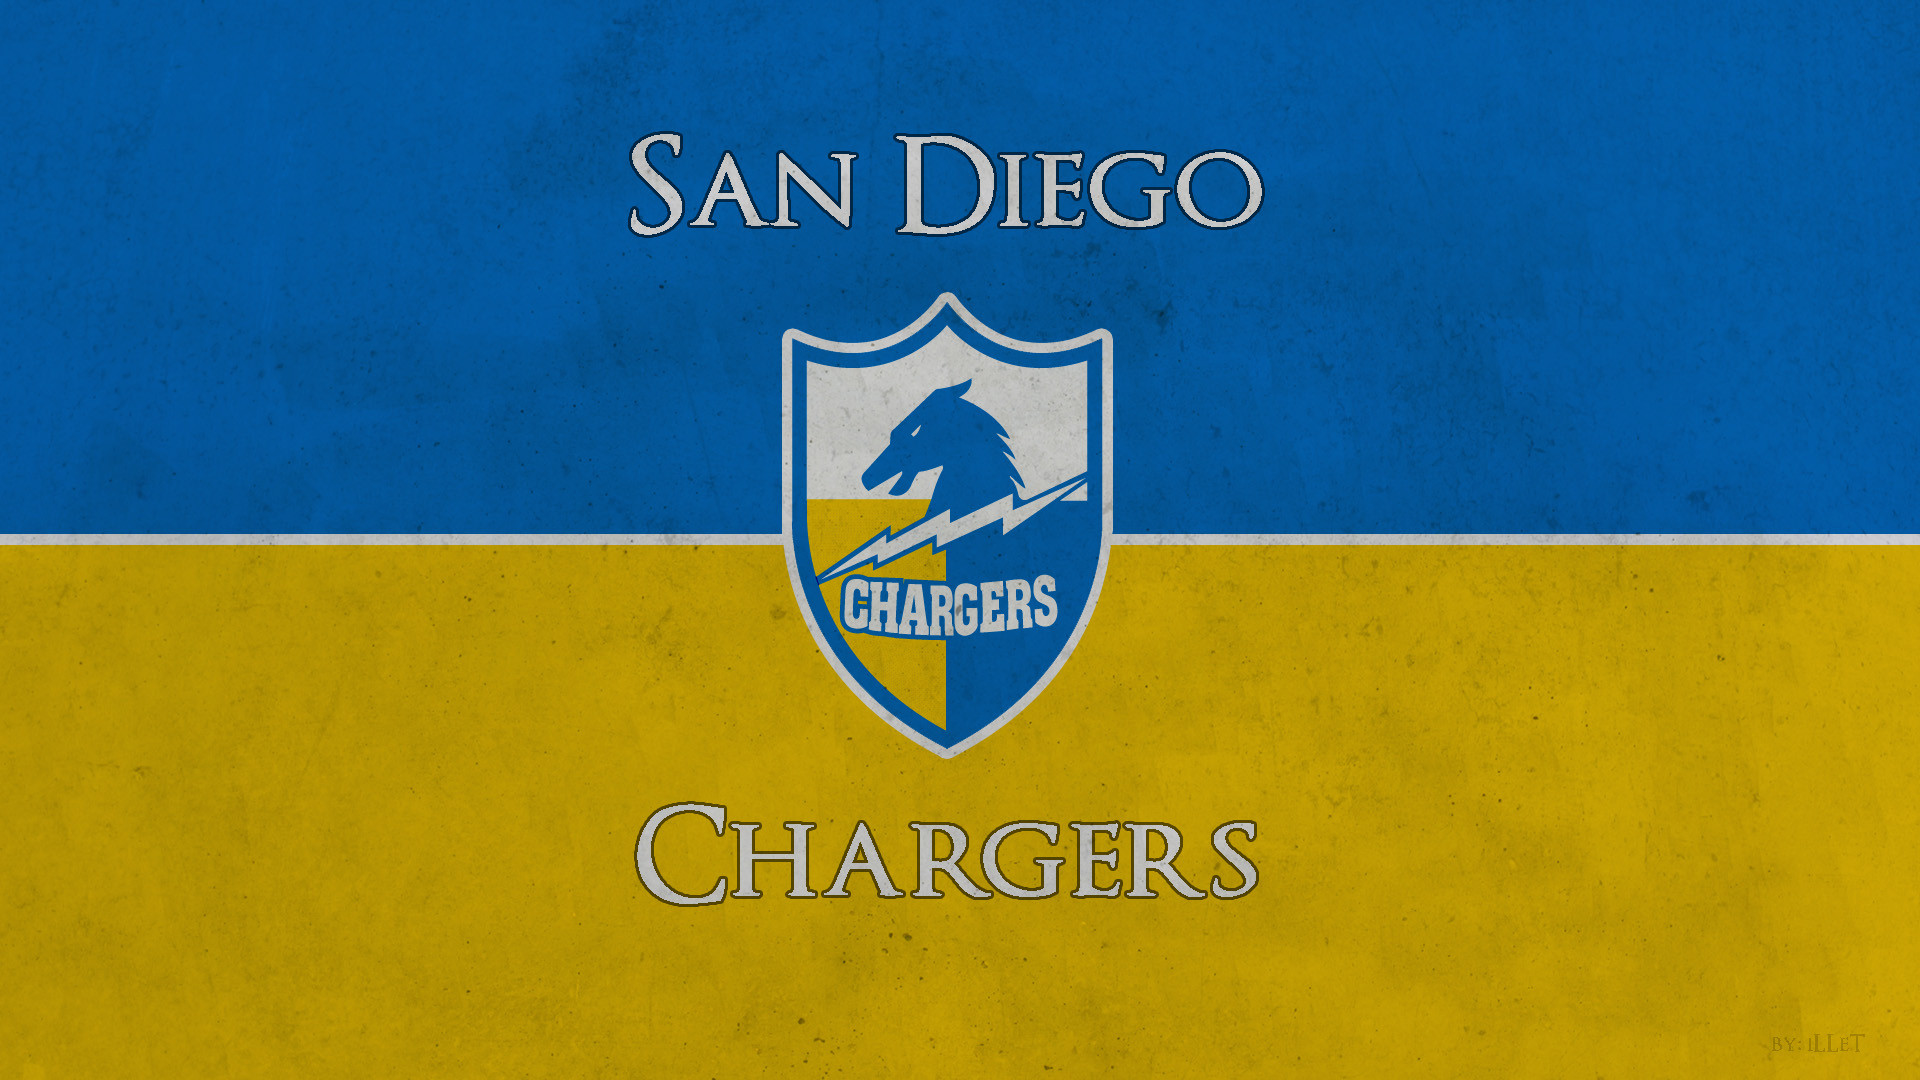 San Diego Chargers Logo Hd Wallpapers